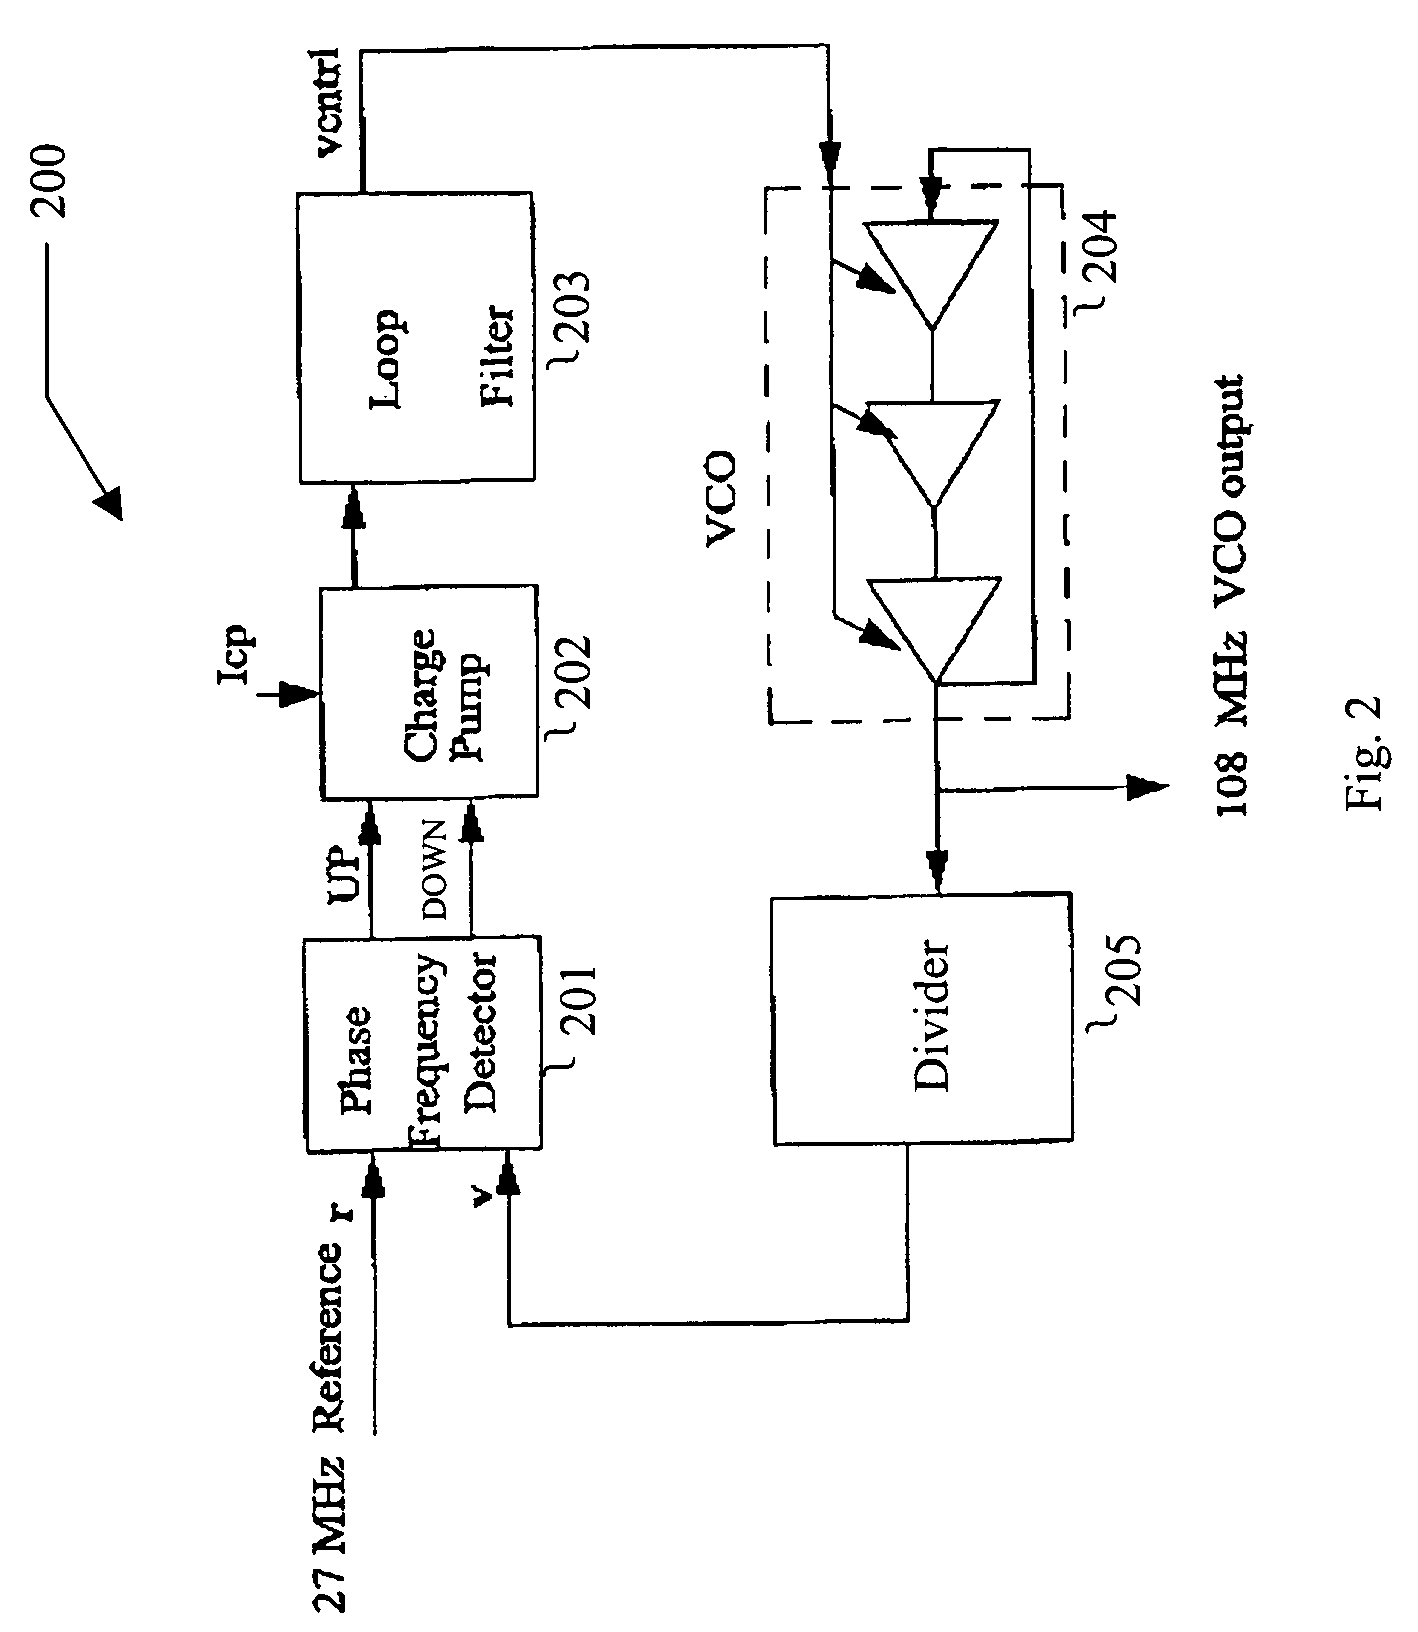 Reduced jitter charge pumps and circuits and systems utilizing the same